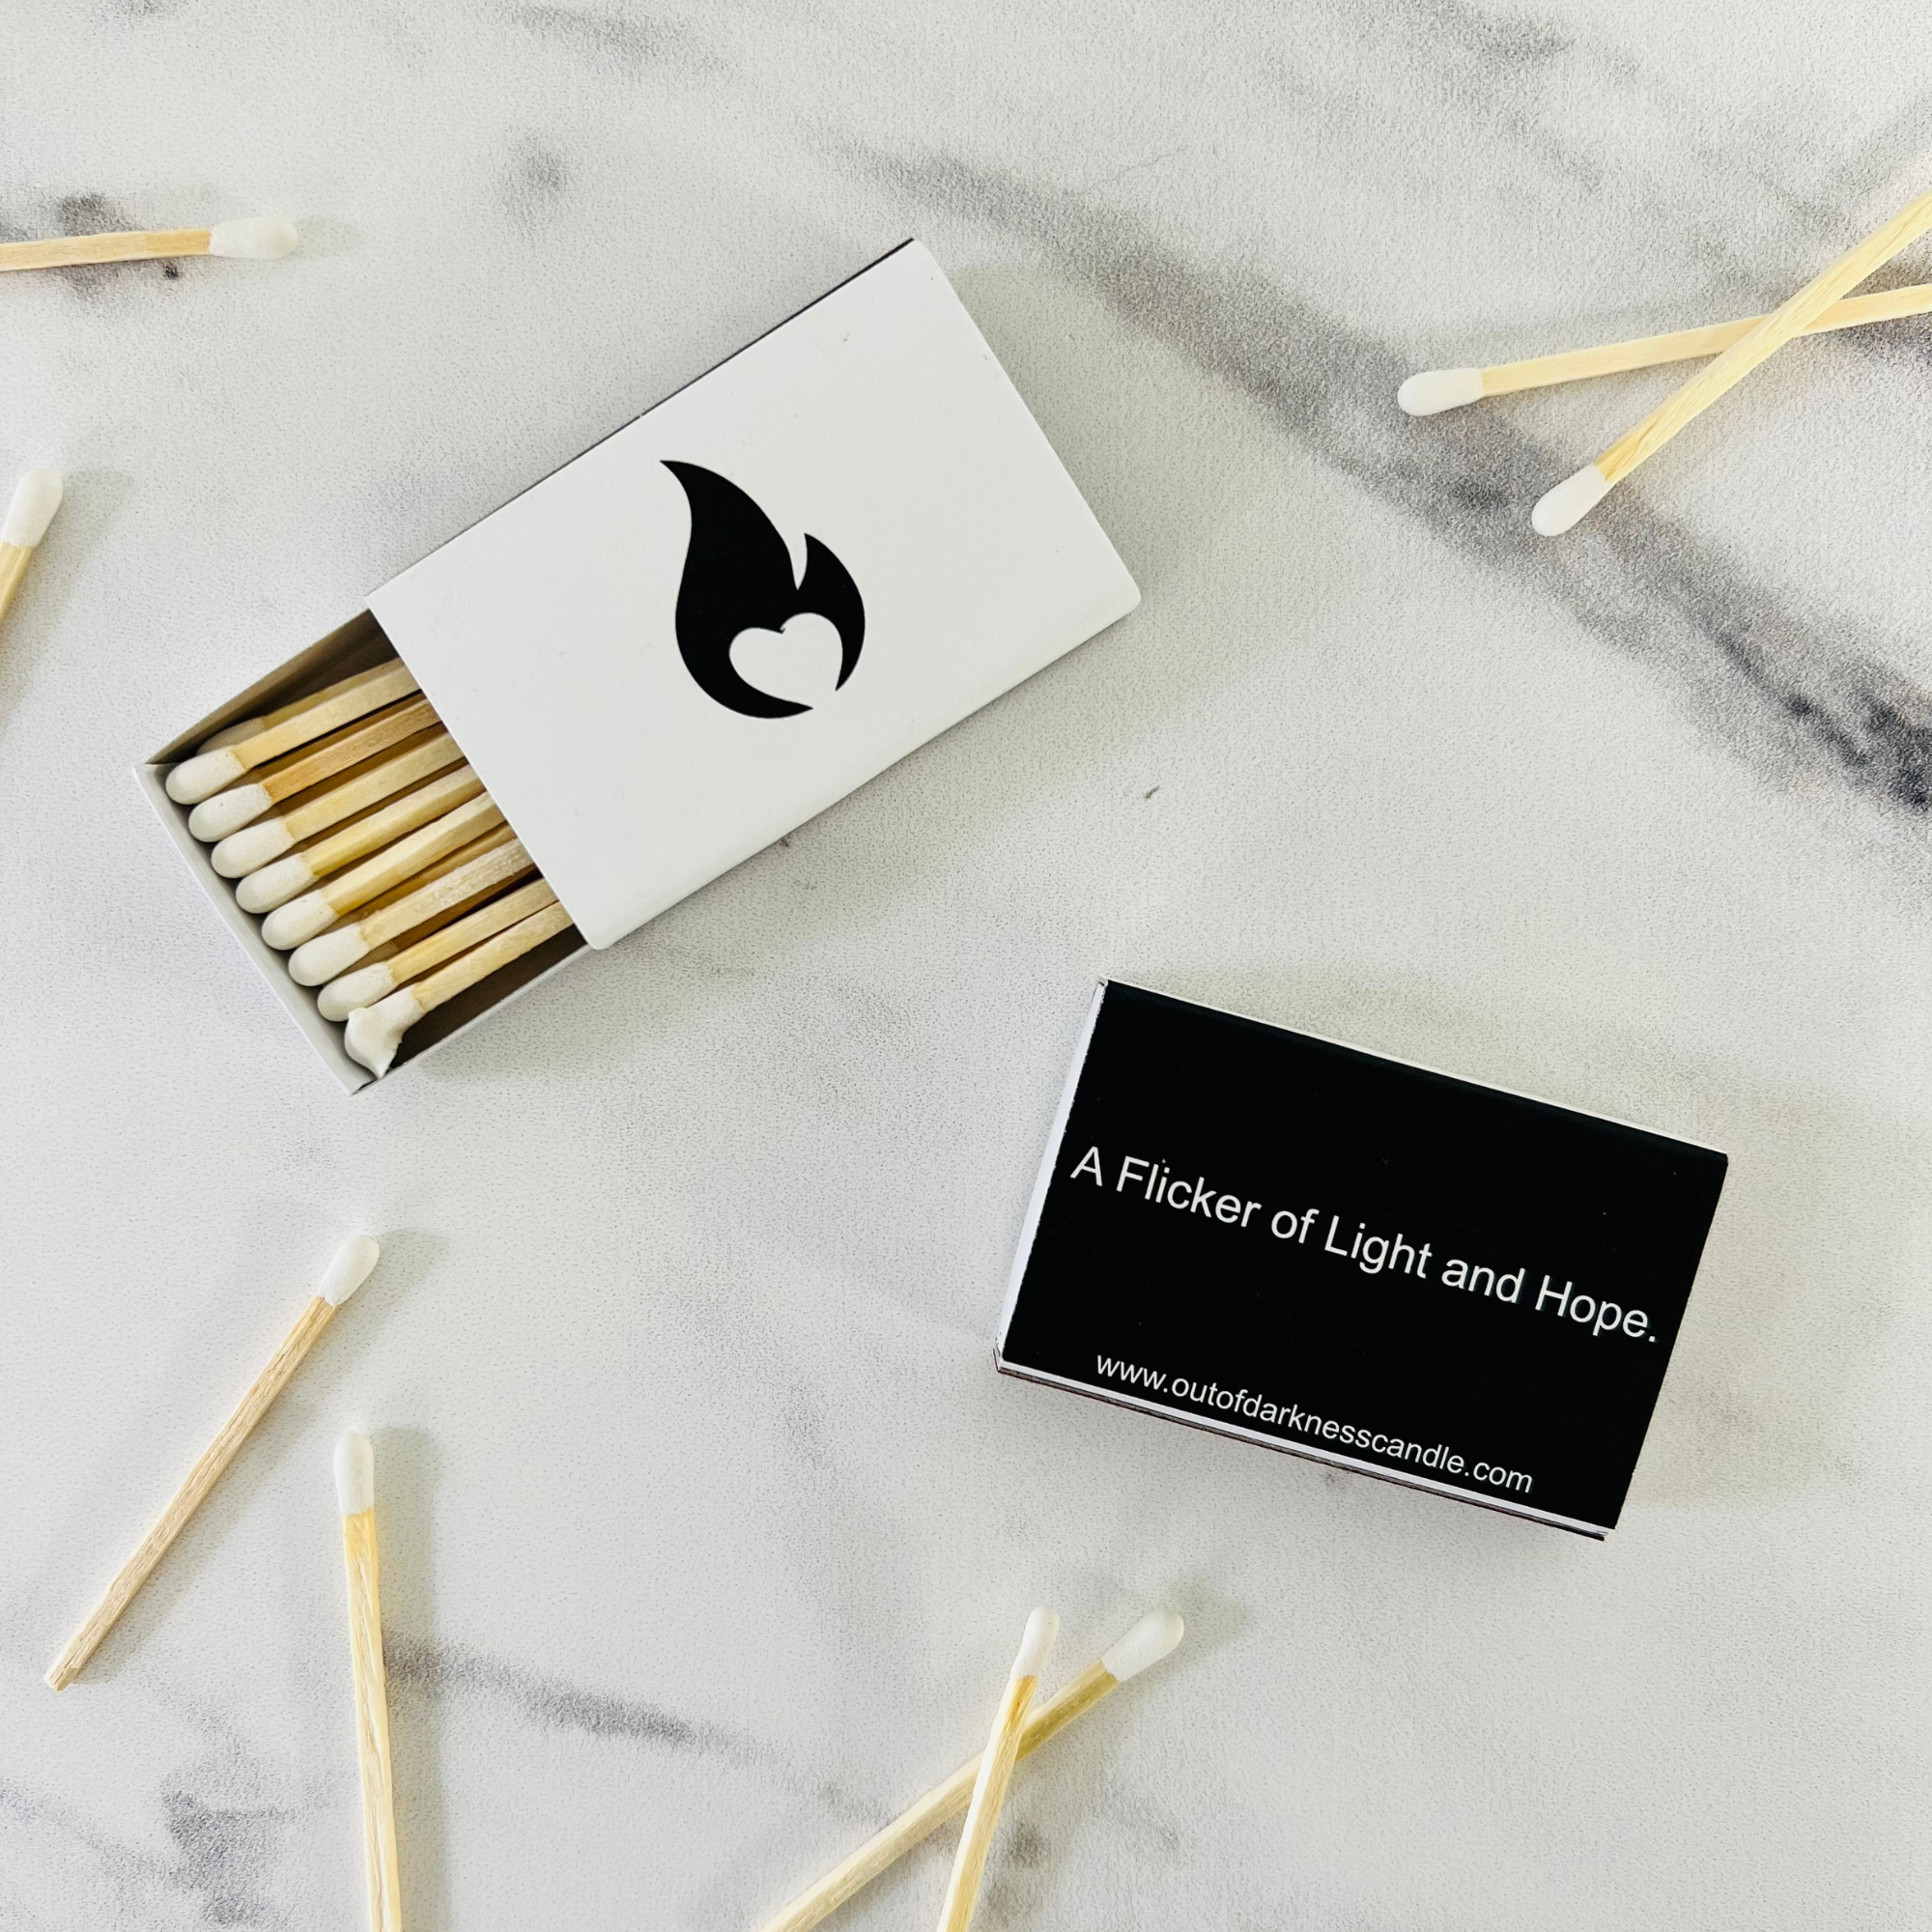 Two boxes of wooden matches on a marble table top with wooden matches around them- One box is white with a black flame and the other matchbox is black with white text reading A Flicker of Light and Hope  